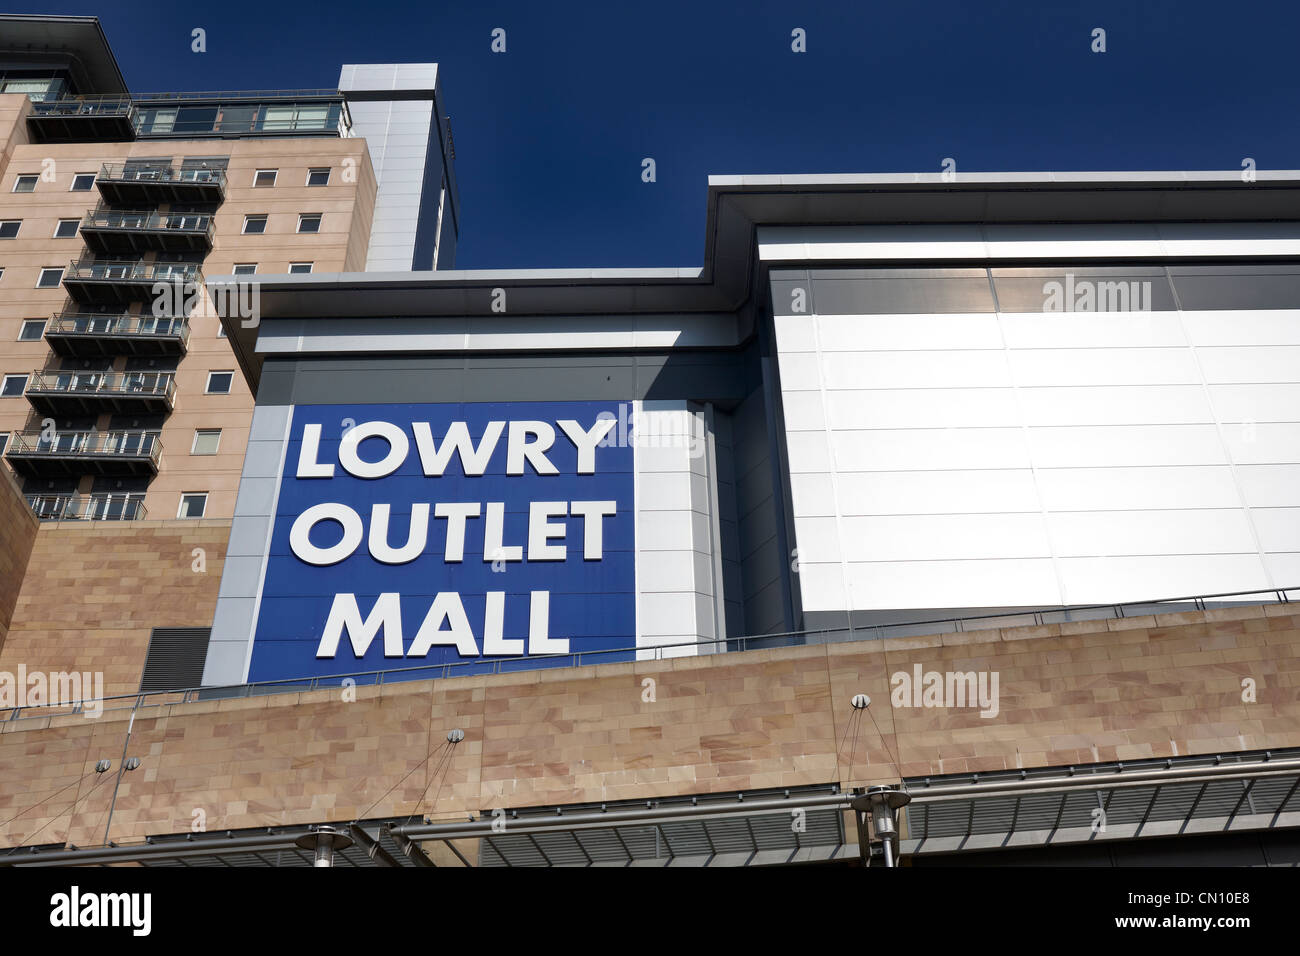 Sign at the Lowry Outlet Mall, Salford Quays, Manchester UK Stock Photo